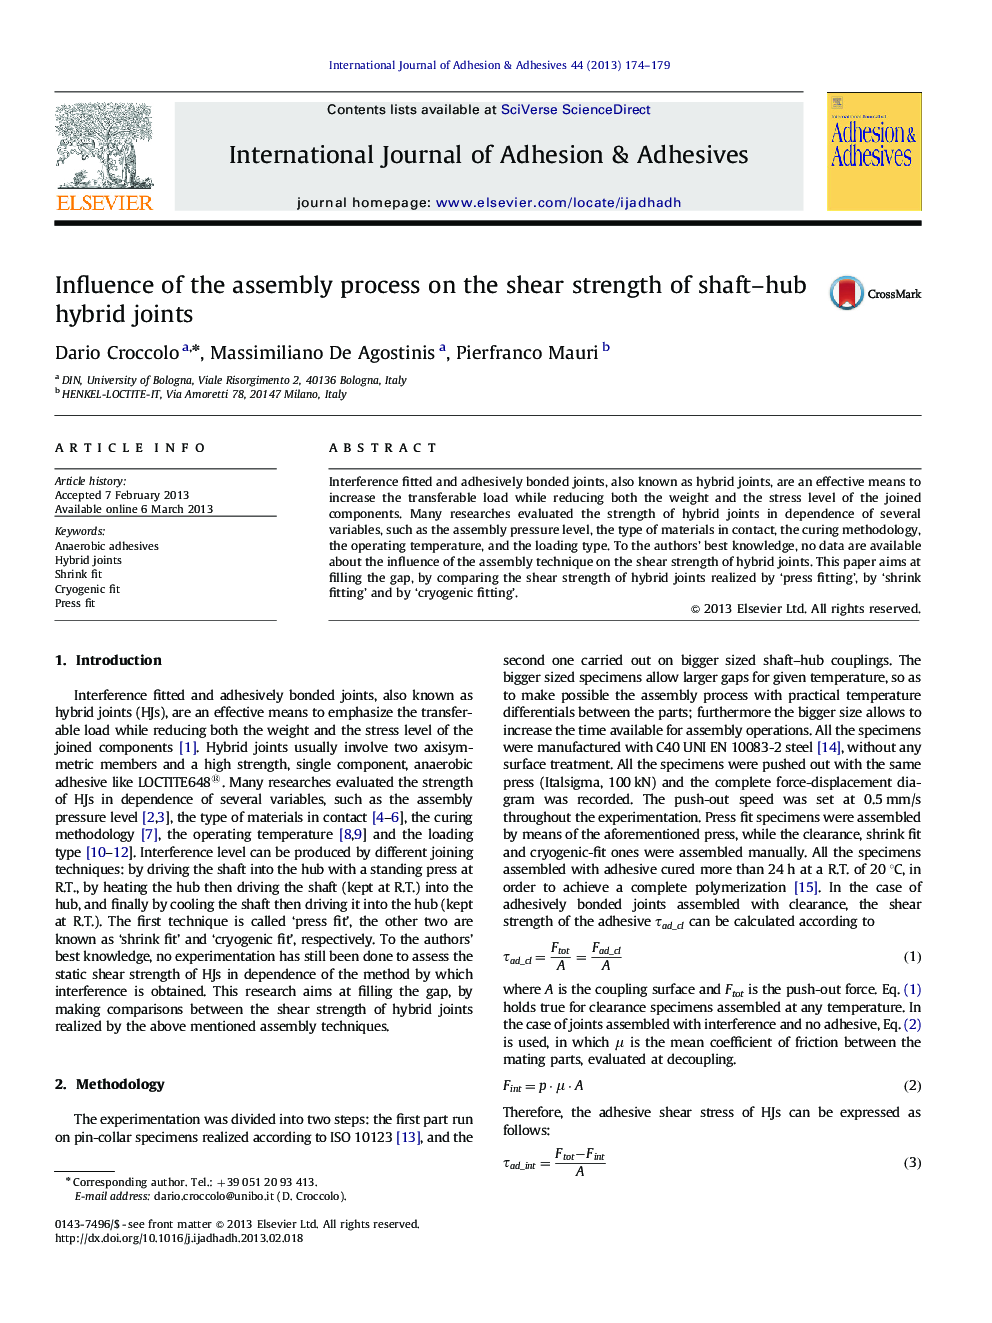 Influence of the assembly process on the shear strength of shaft–hub hybrid joints